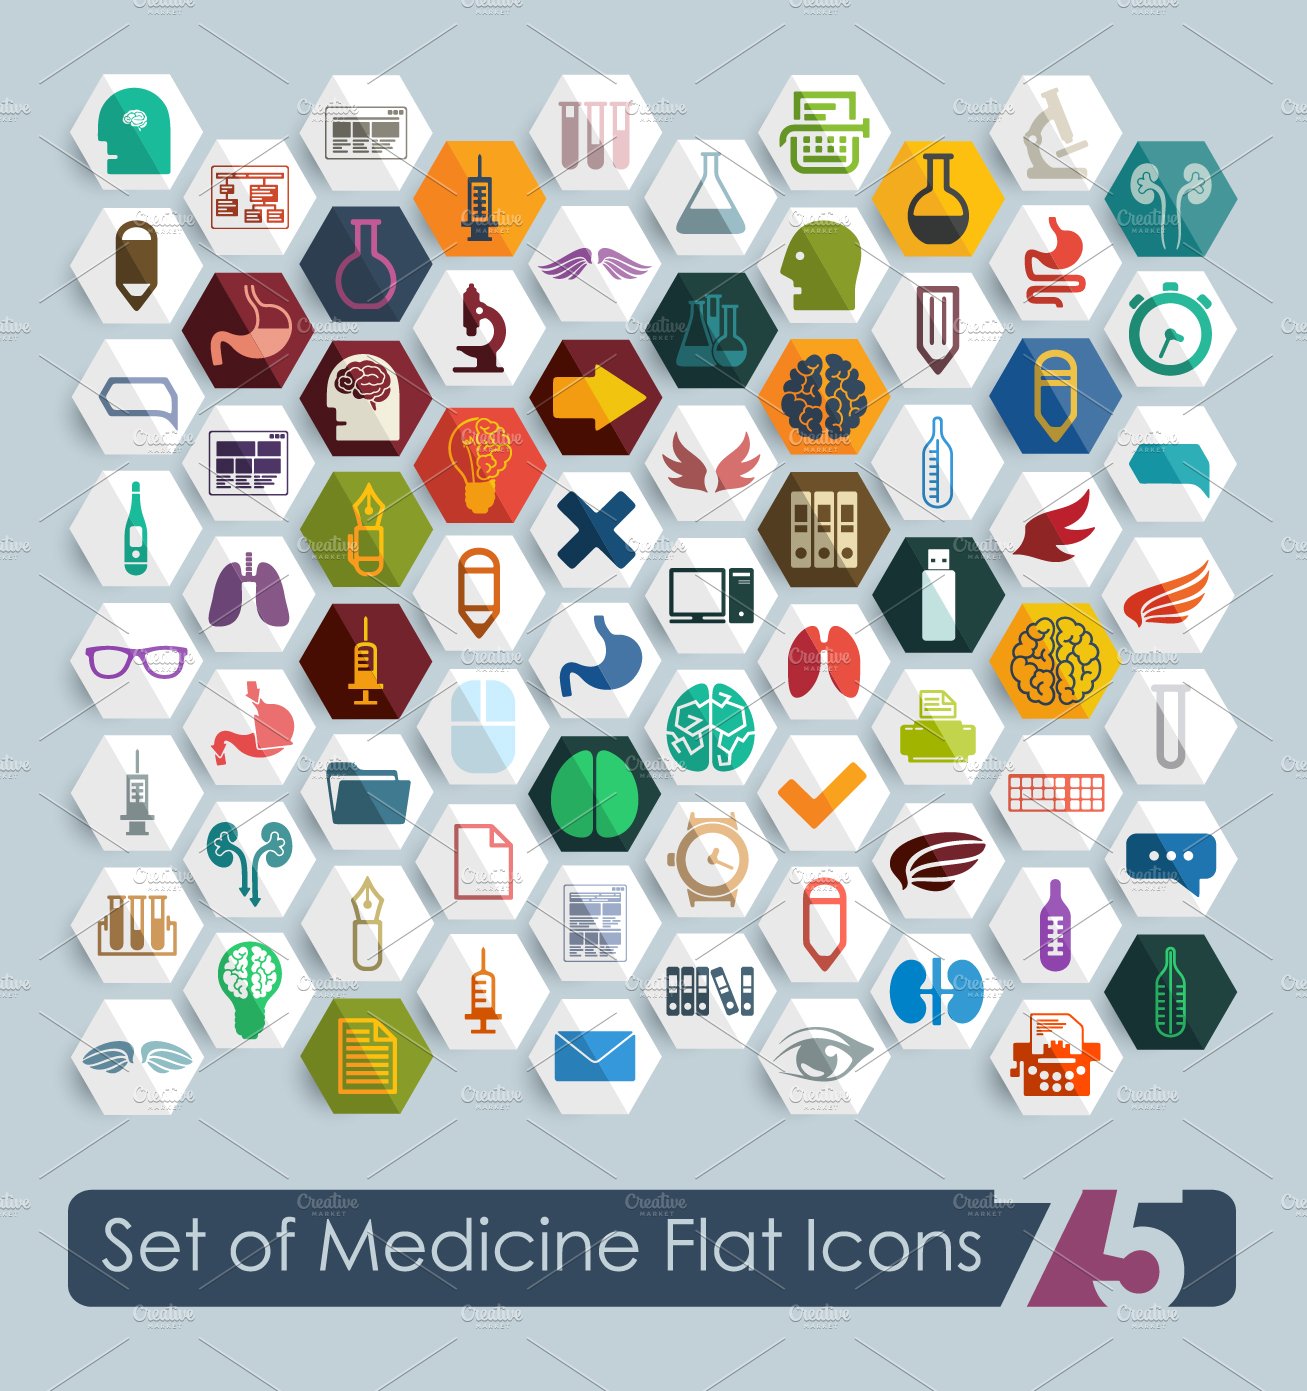 75 MEDICAL flat icons preview image.